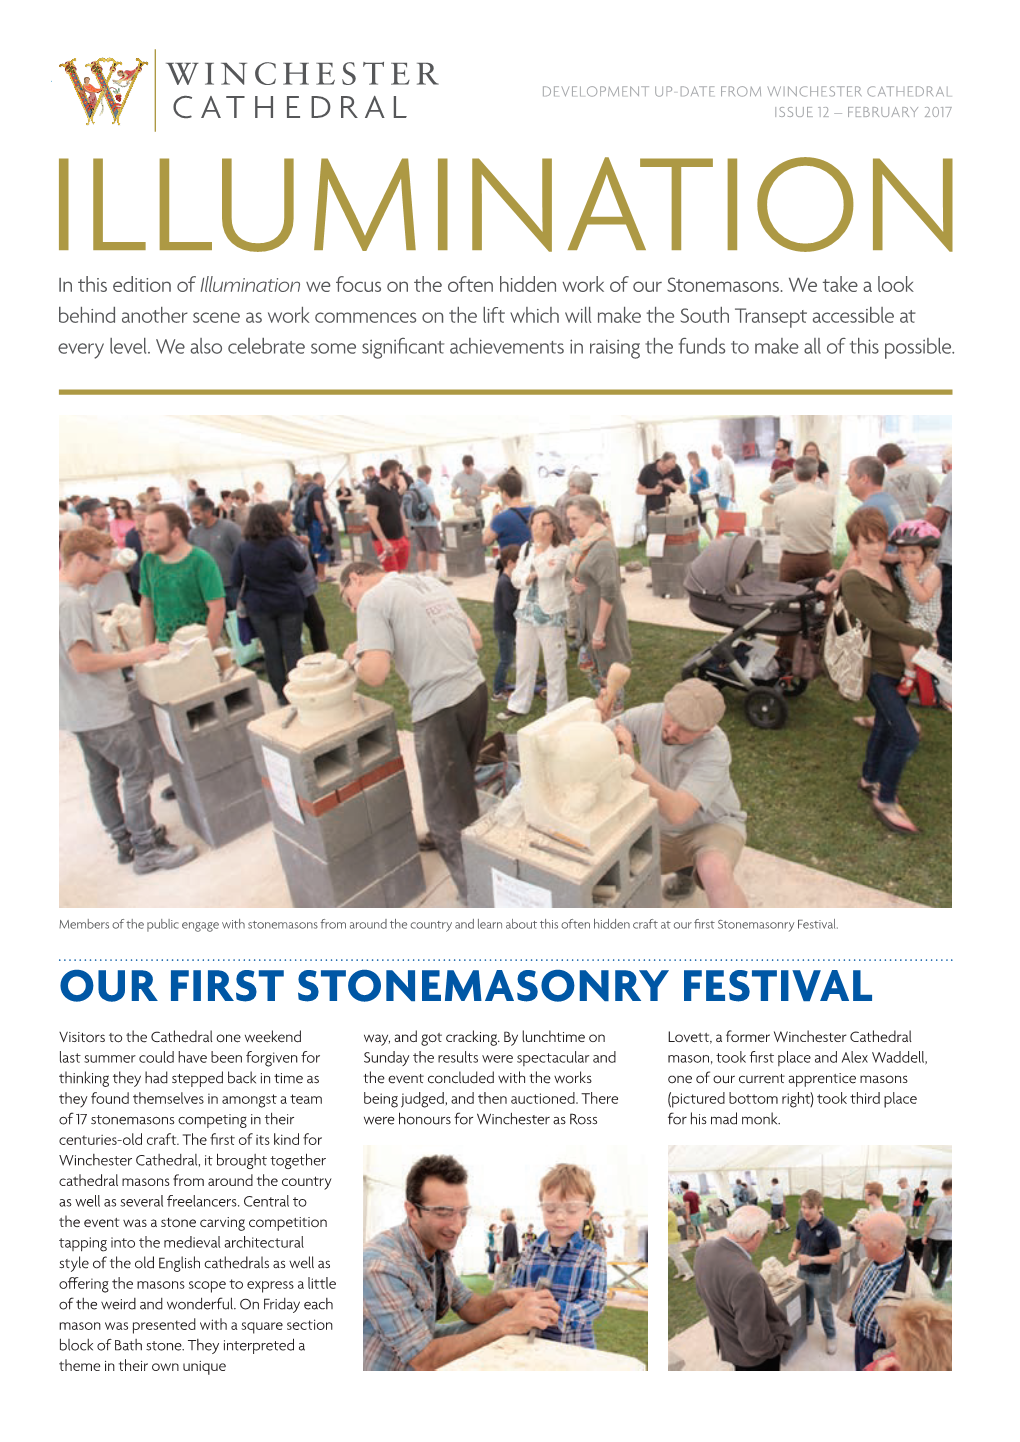 Our First Stonemasonry Festival